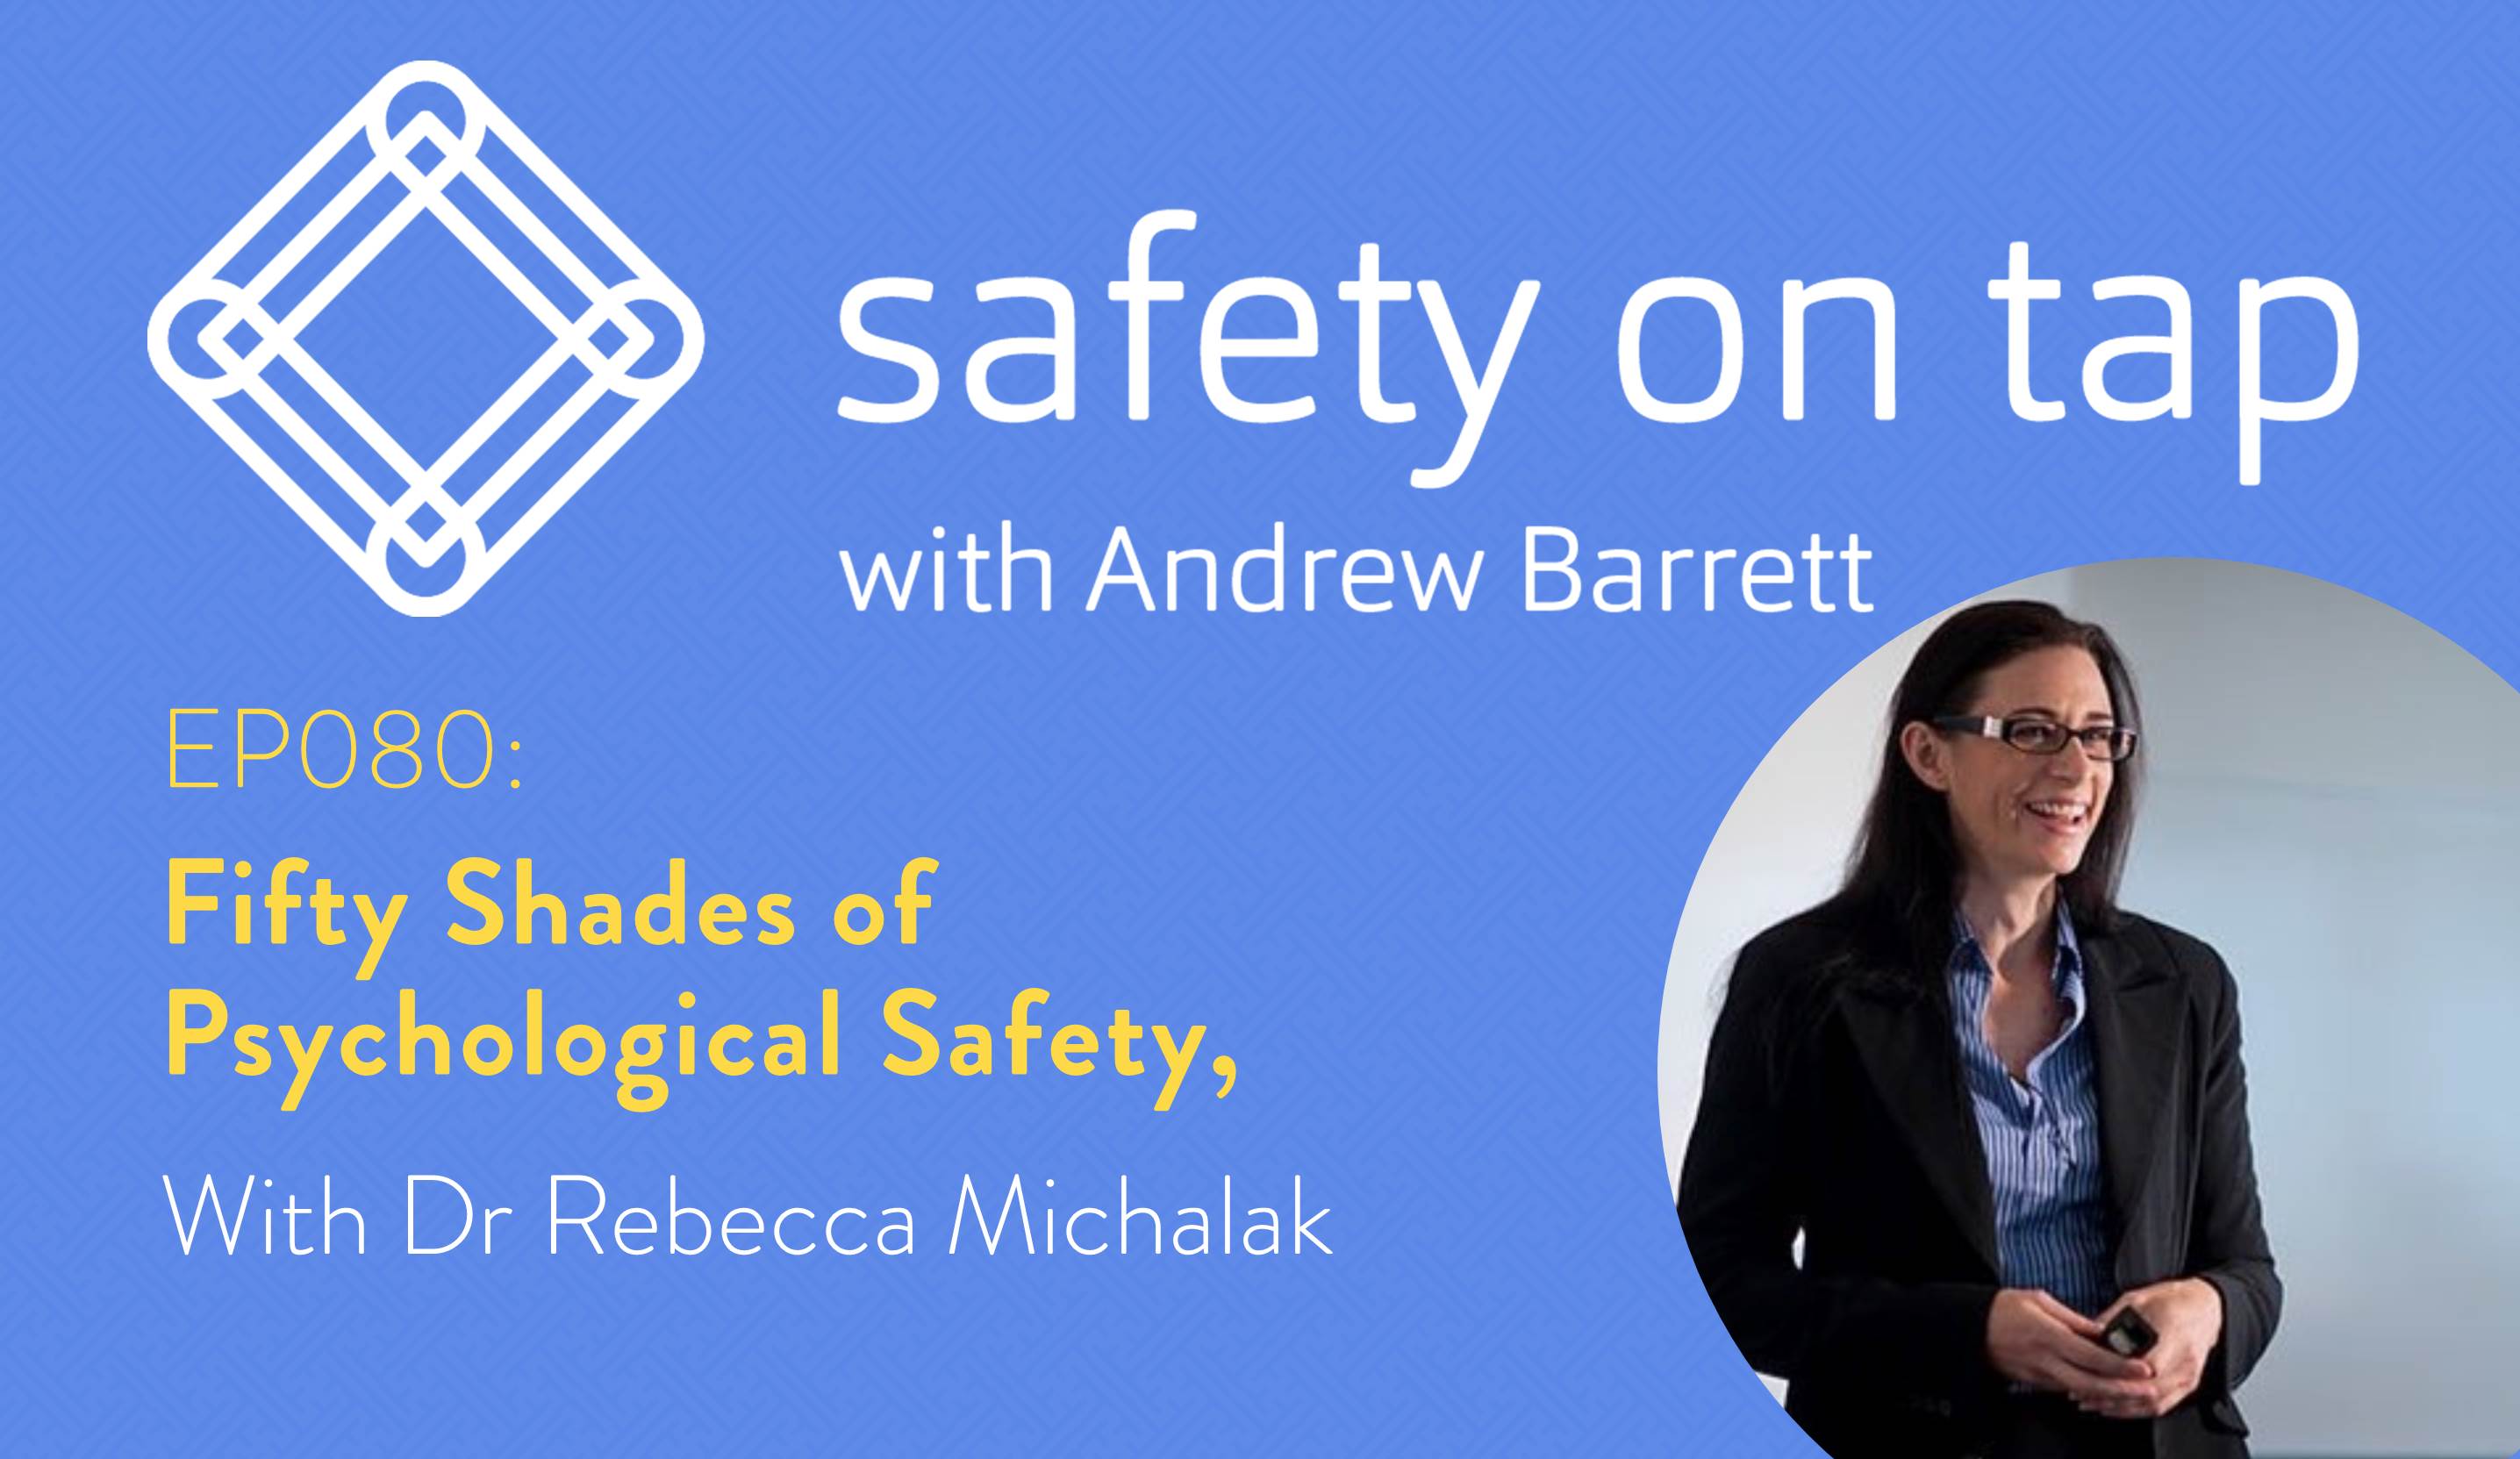 Ep080: Fifty Shades of Psychological Safety, with Dr Rebecca Michalak